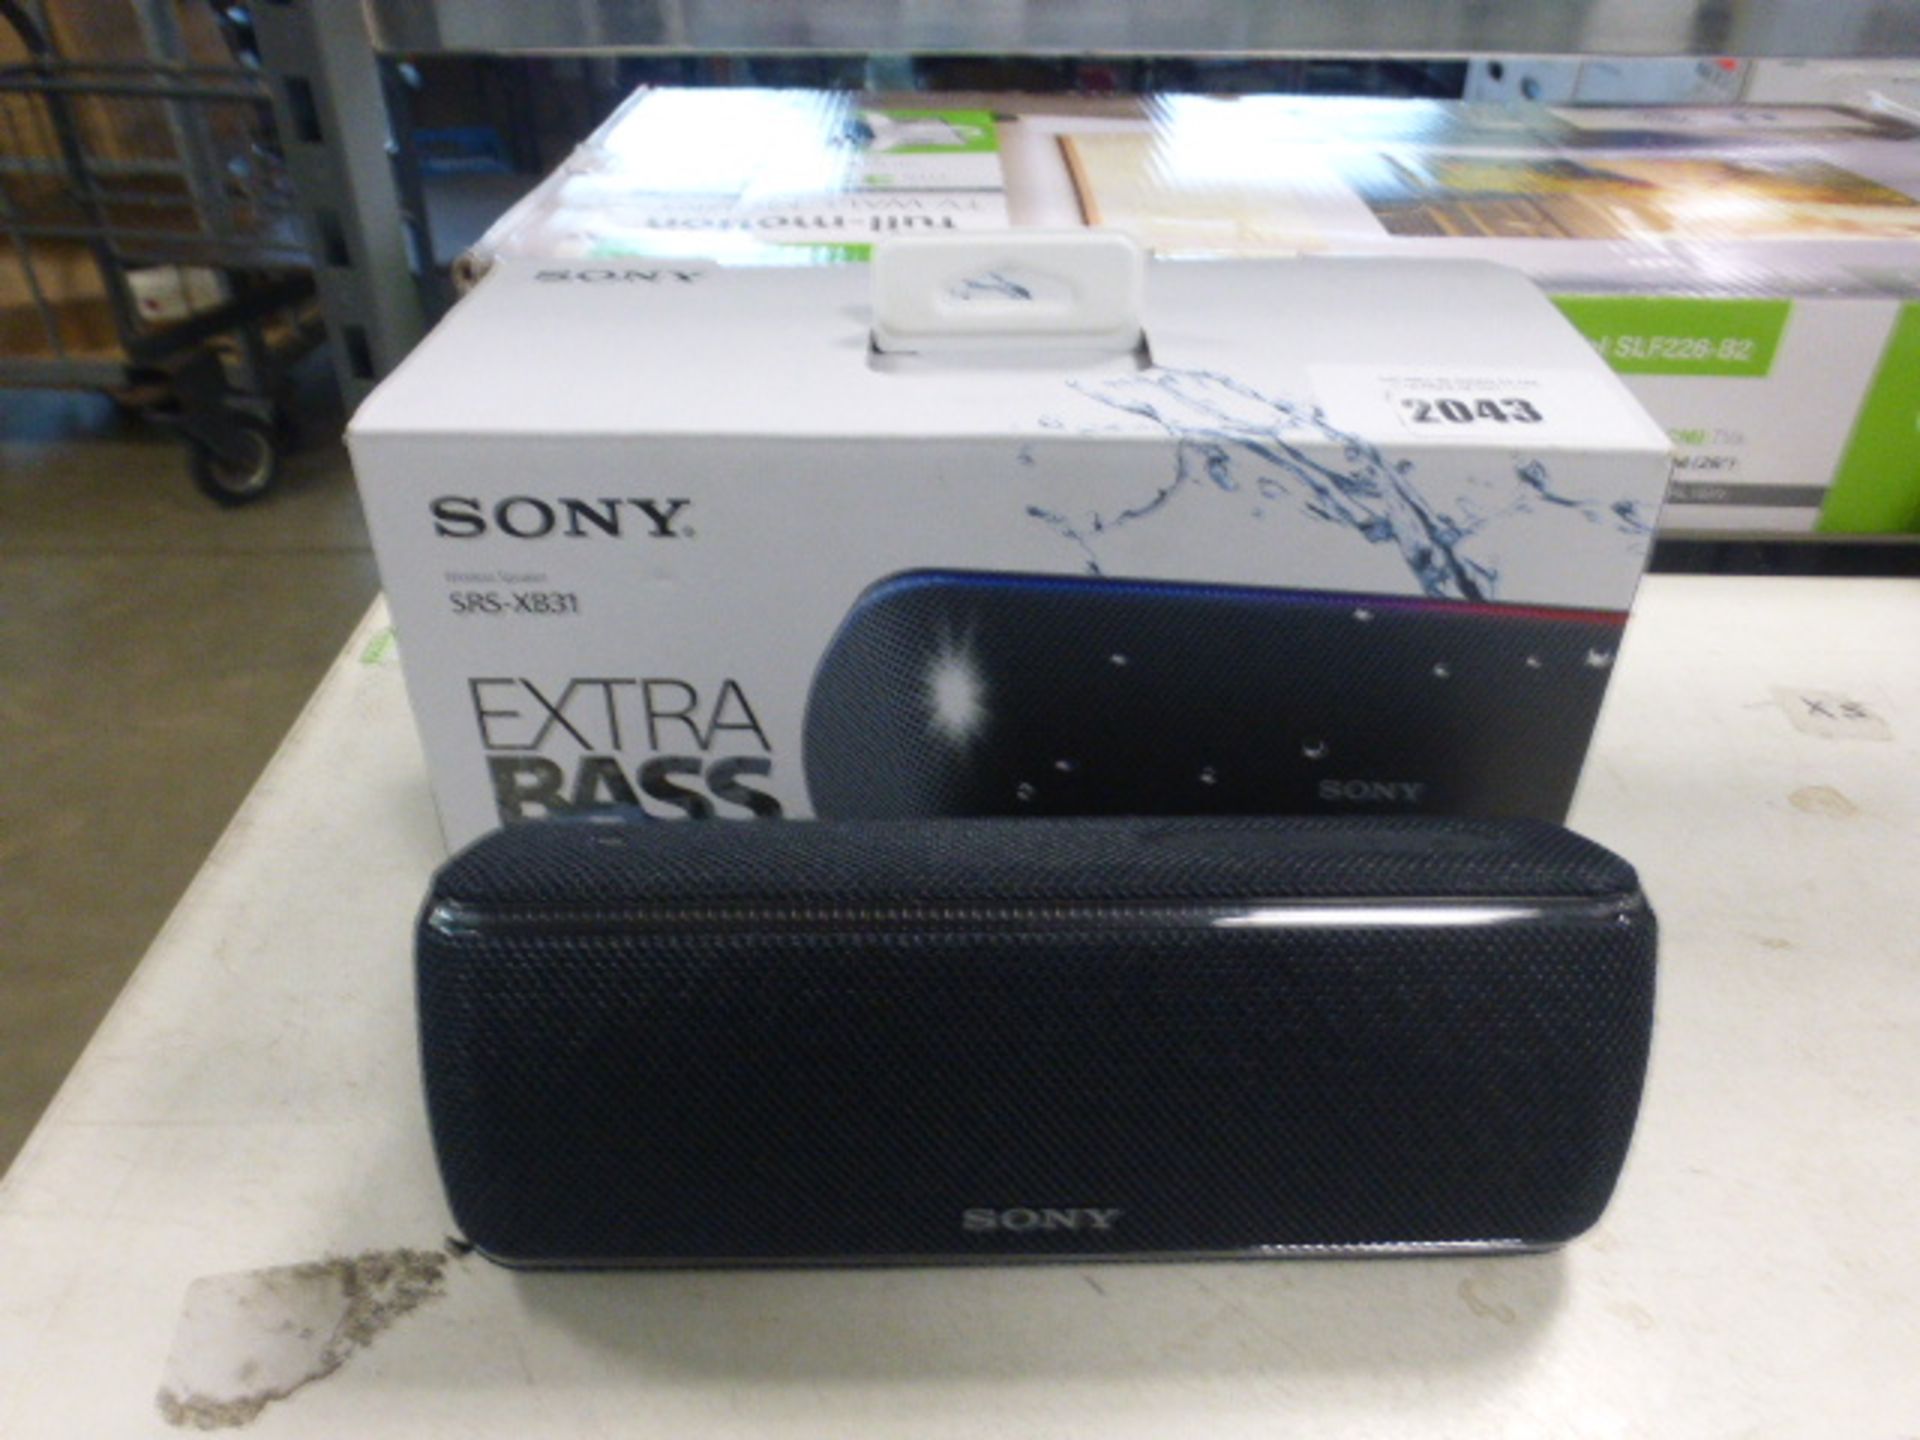 Sony SRS-XB31 portable bluetooth speaker with box